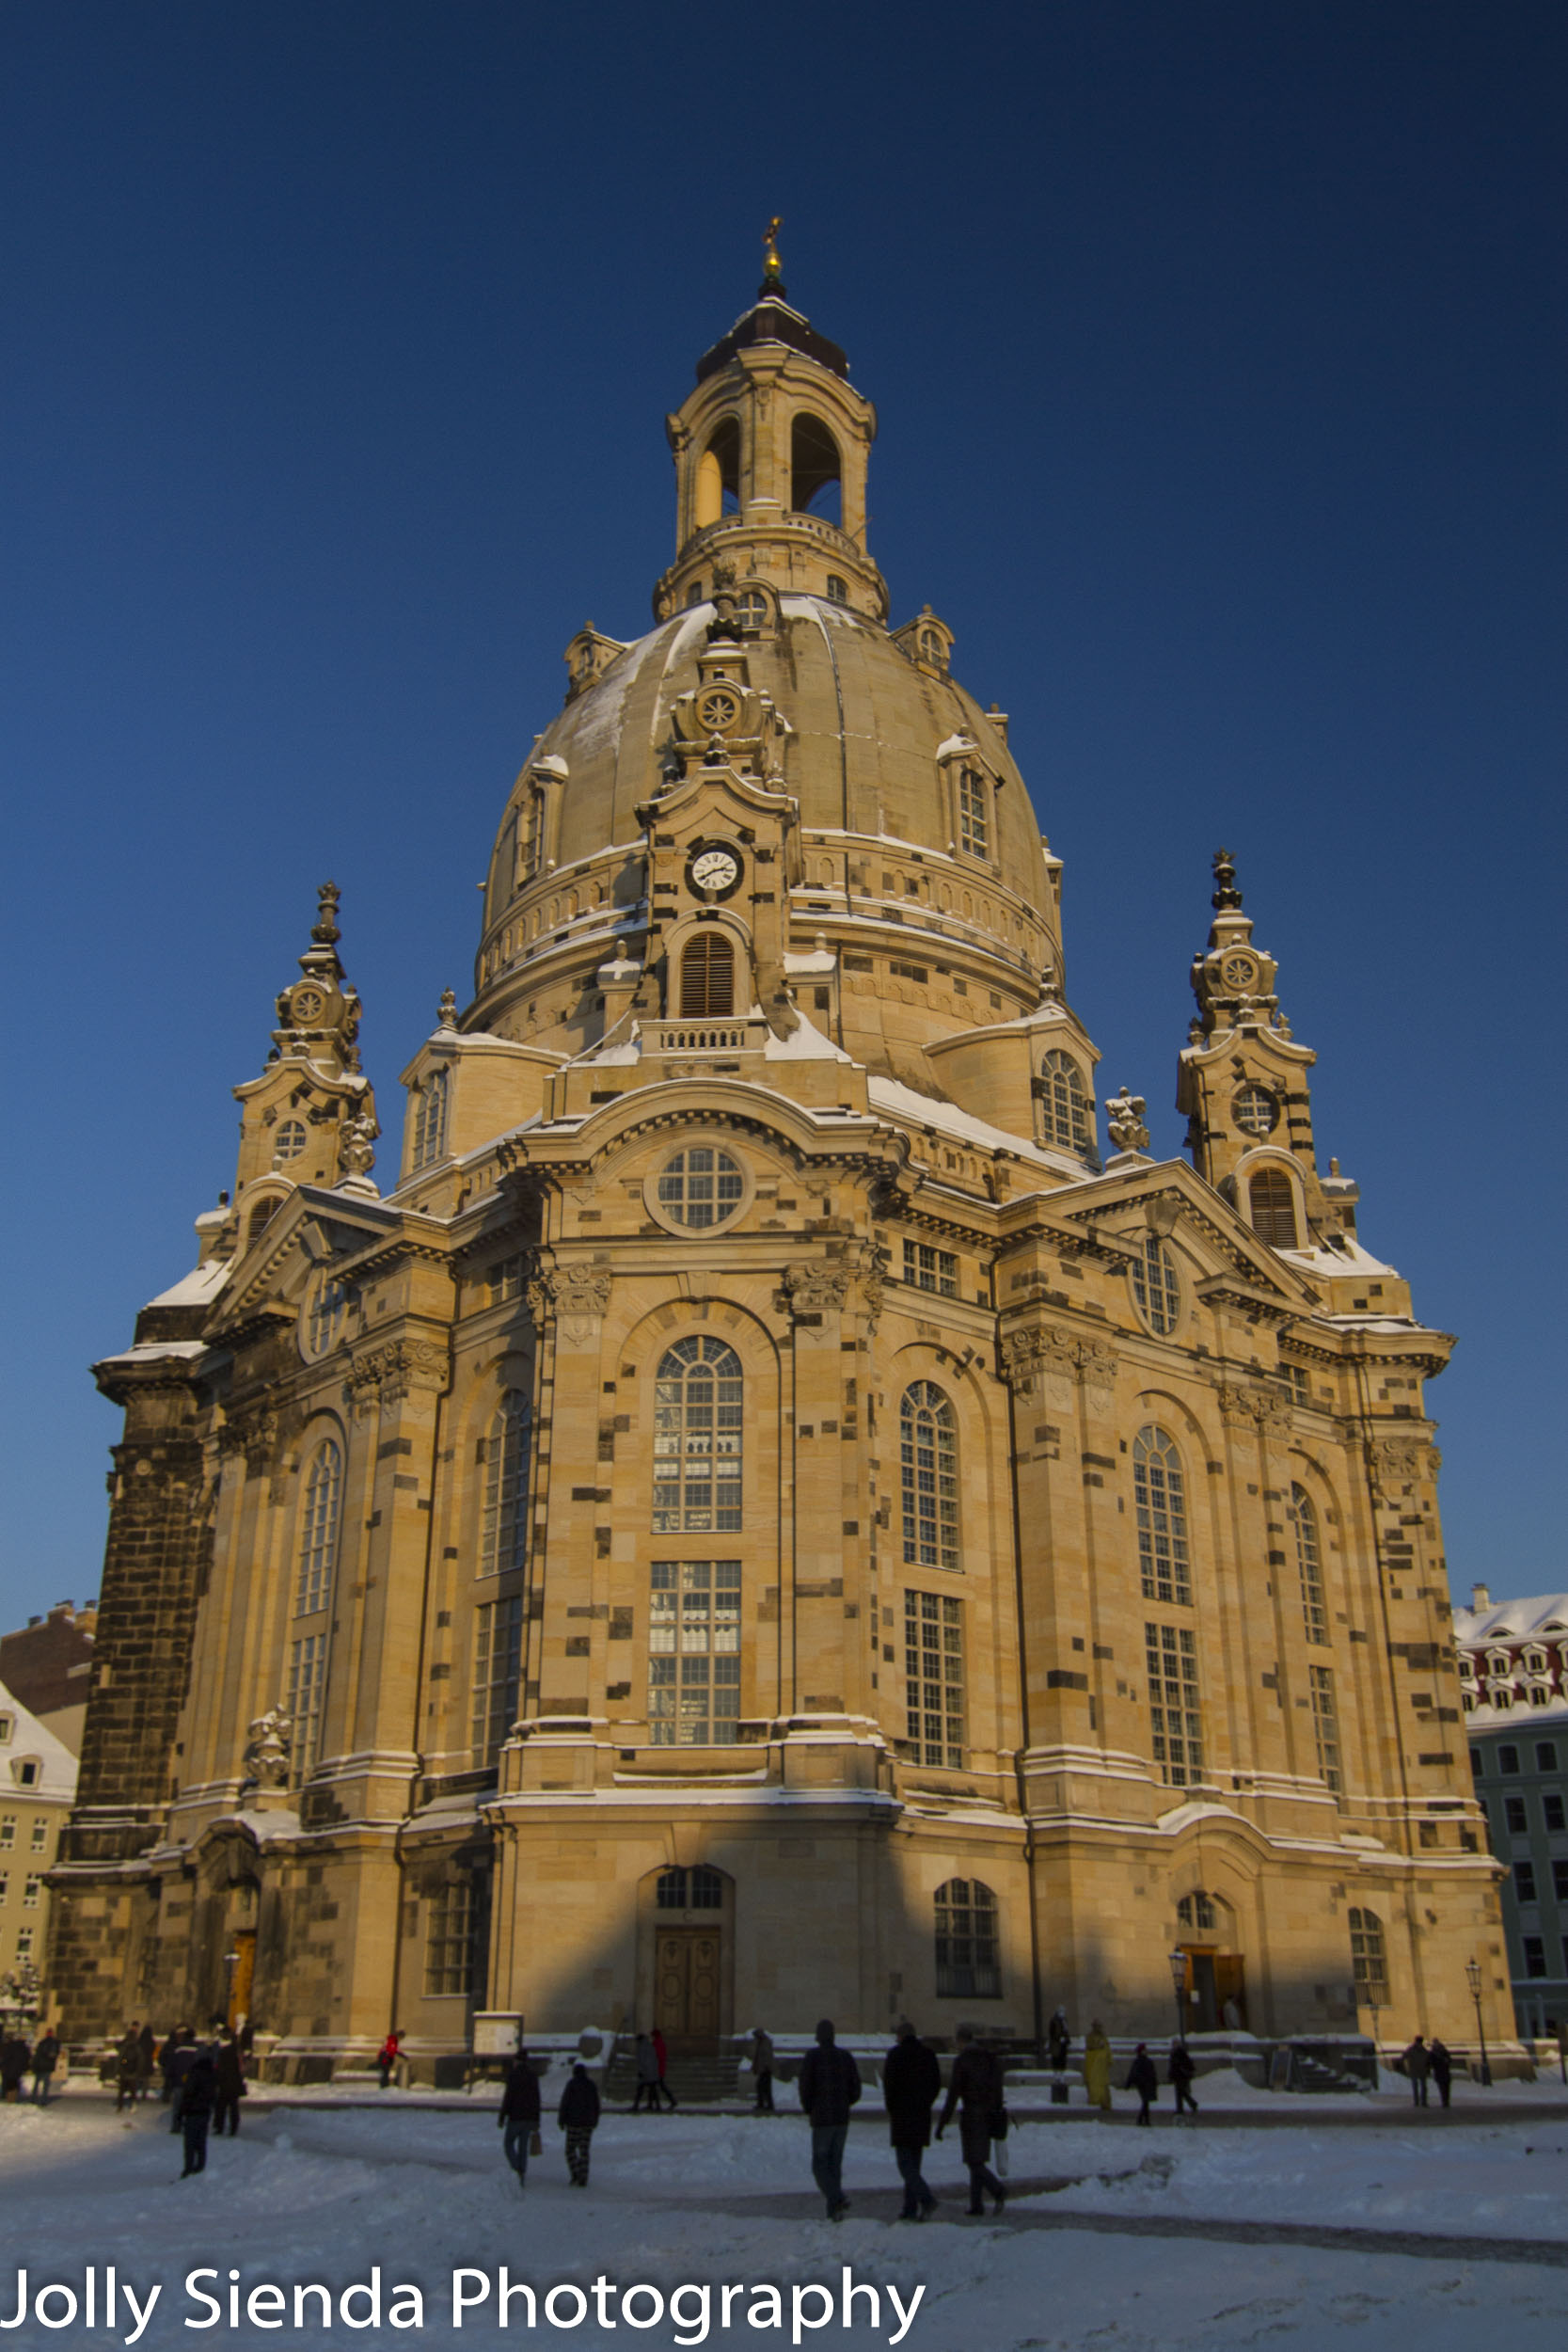 Church of our Lady, Frauenkirche, and people in the snow